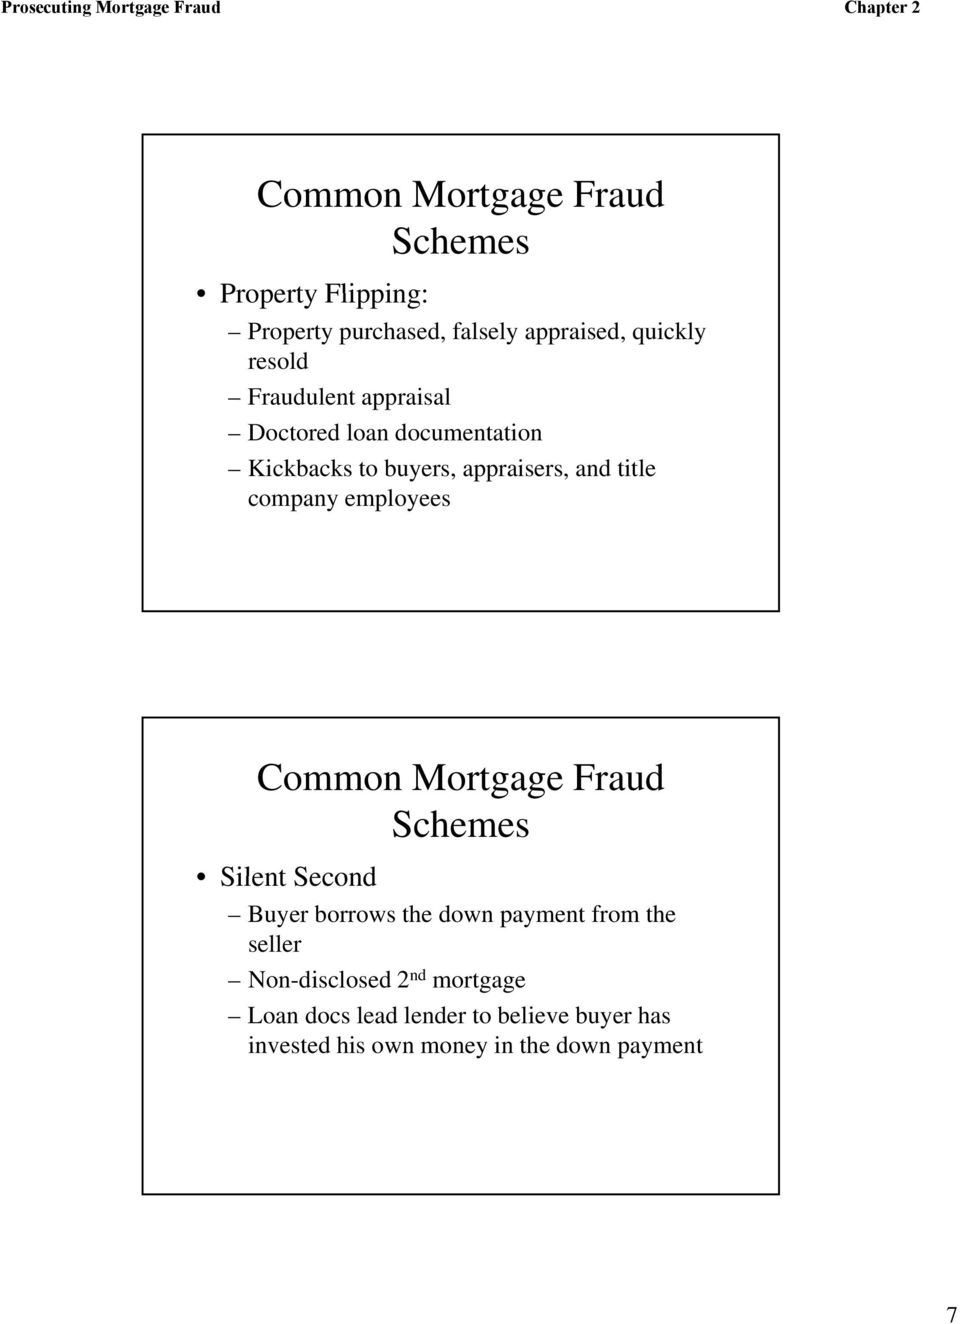 title company employees Common Mortgage Fraud Schemes Silent Second Buyer borrows the down payment from the